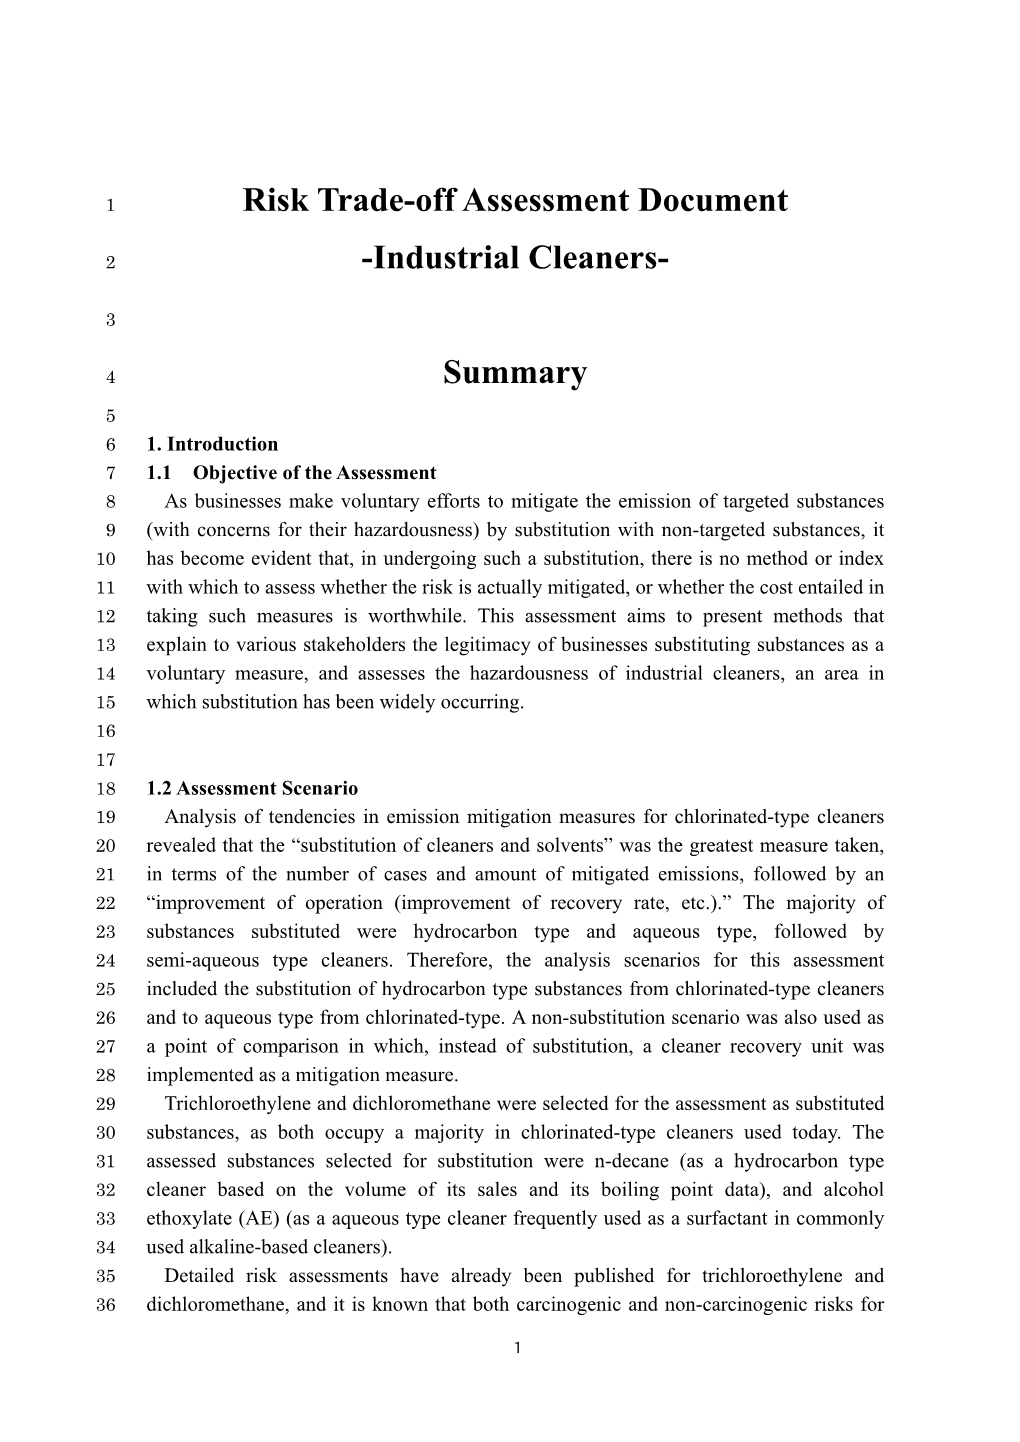 Risk Trade-Off Assessment Document -Industrial Cleaners- Summary